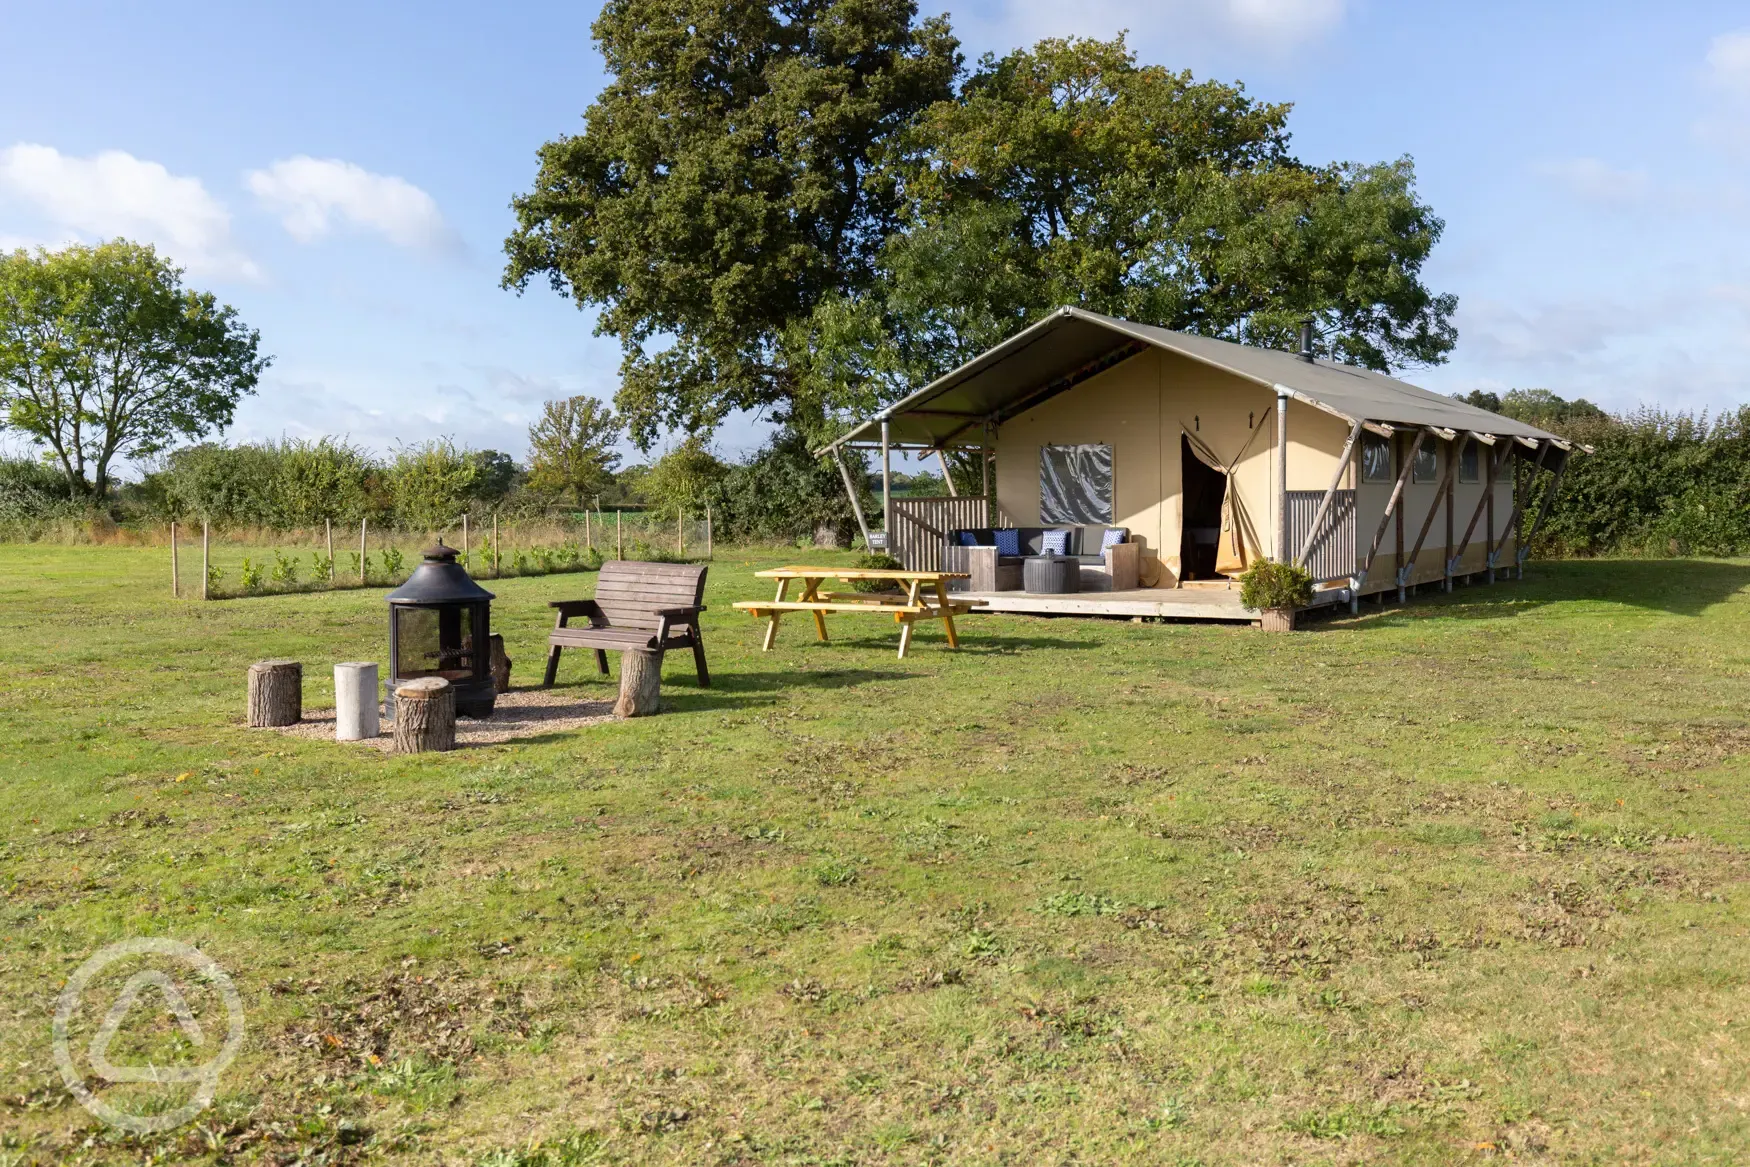 Luxury Safari Tent, where everything is already set up for your glamping holiday